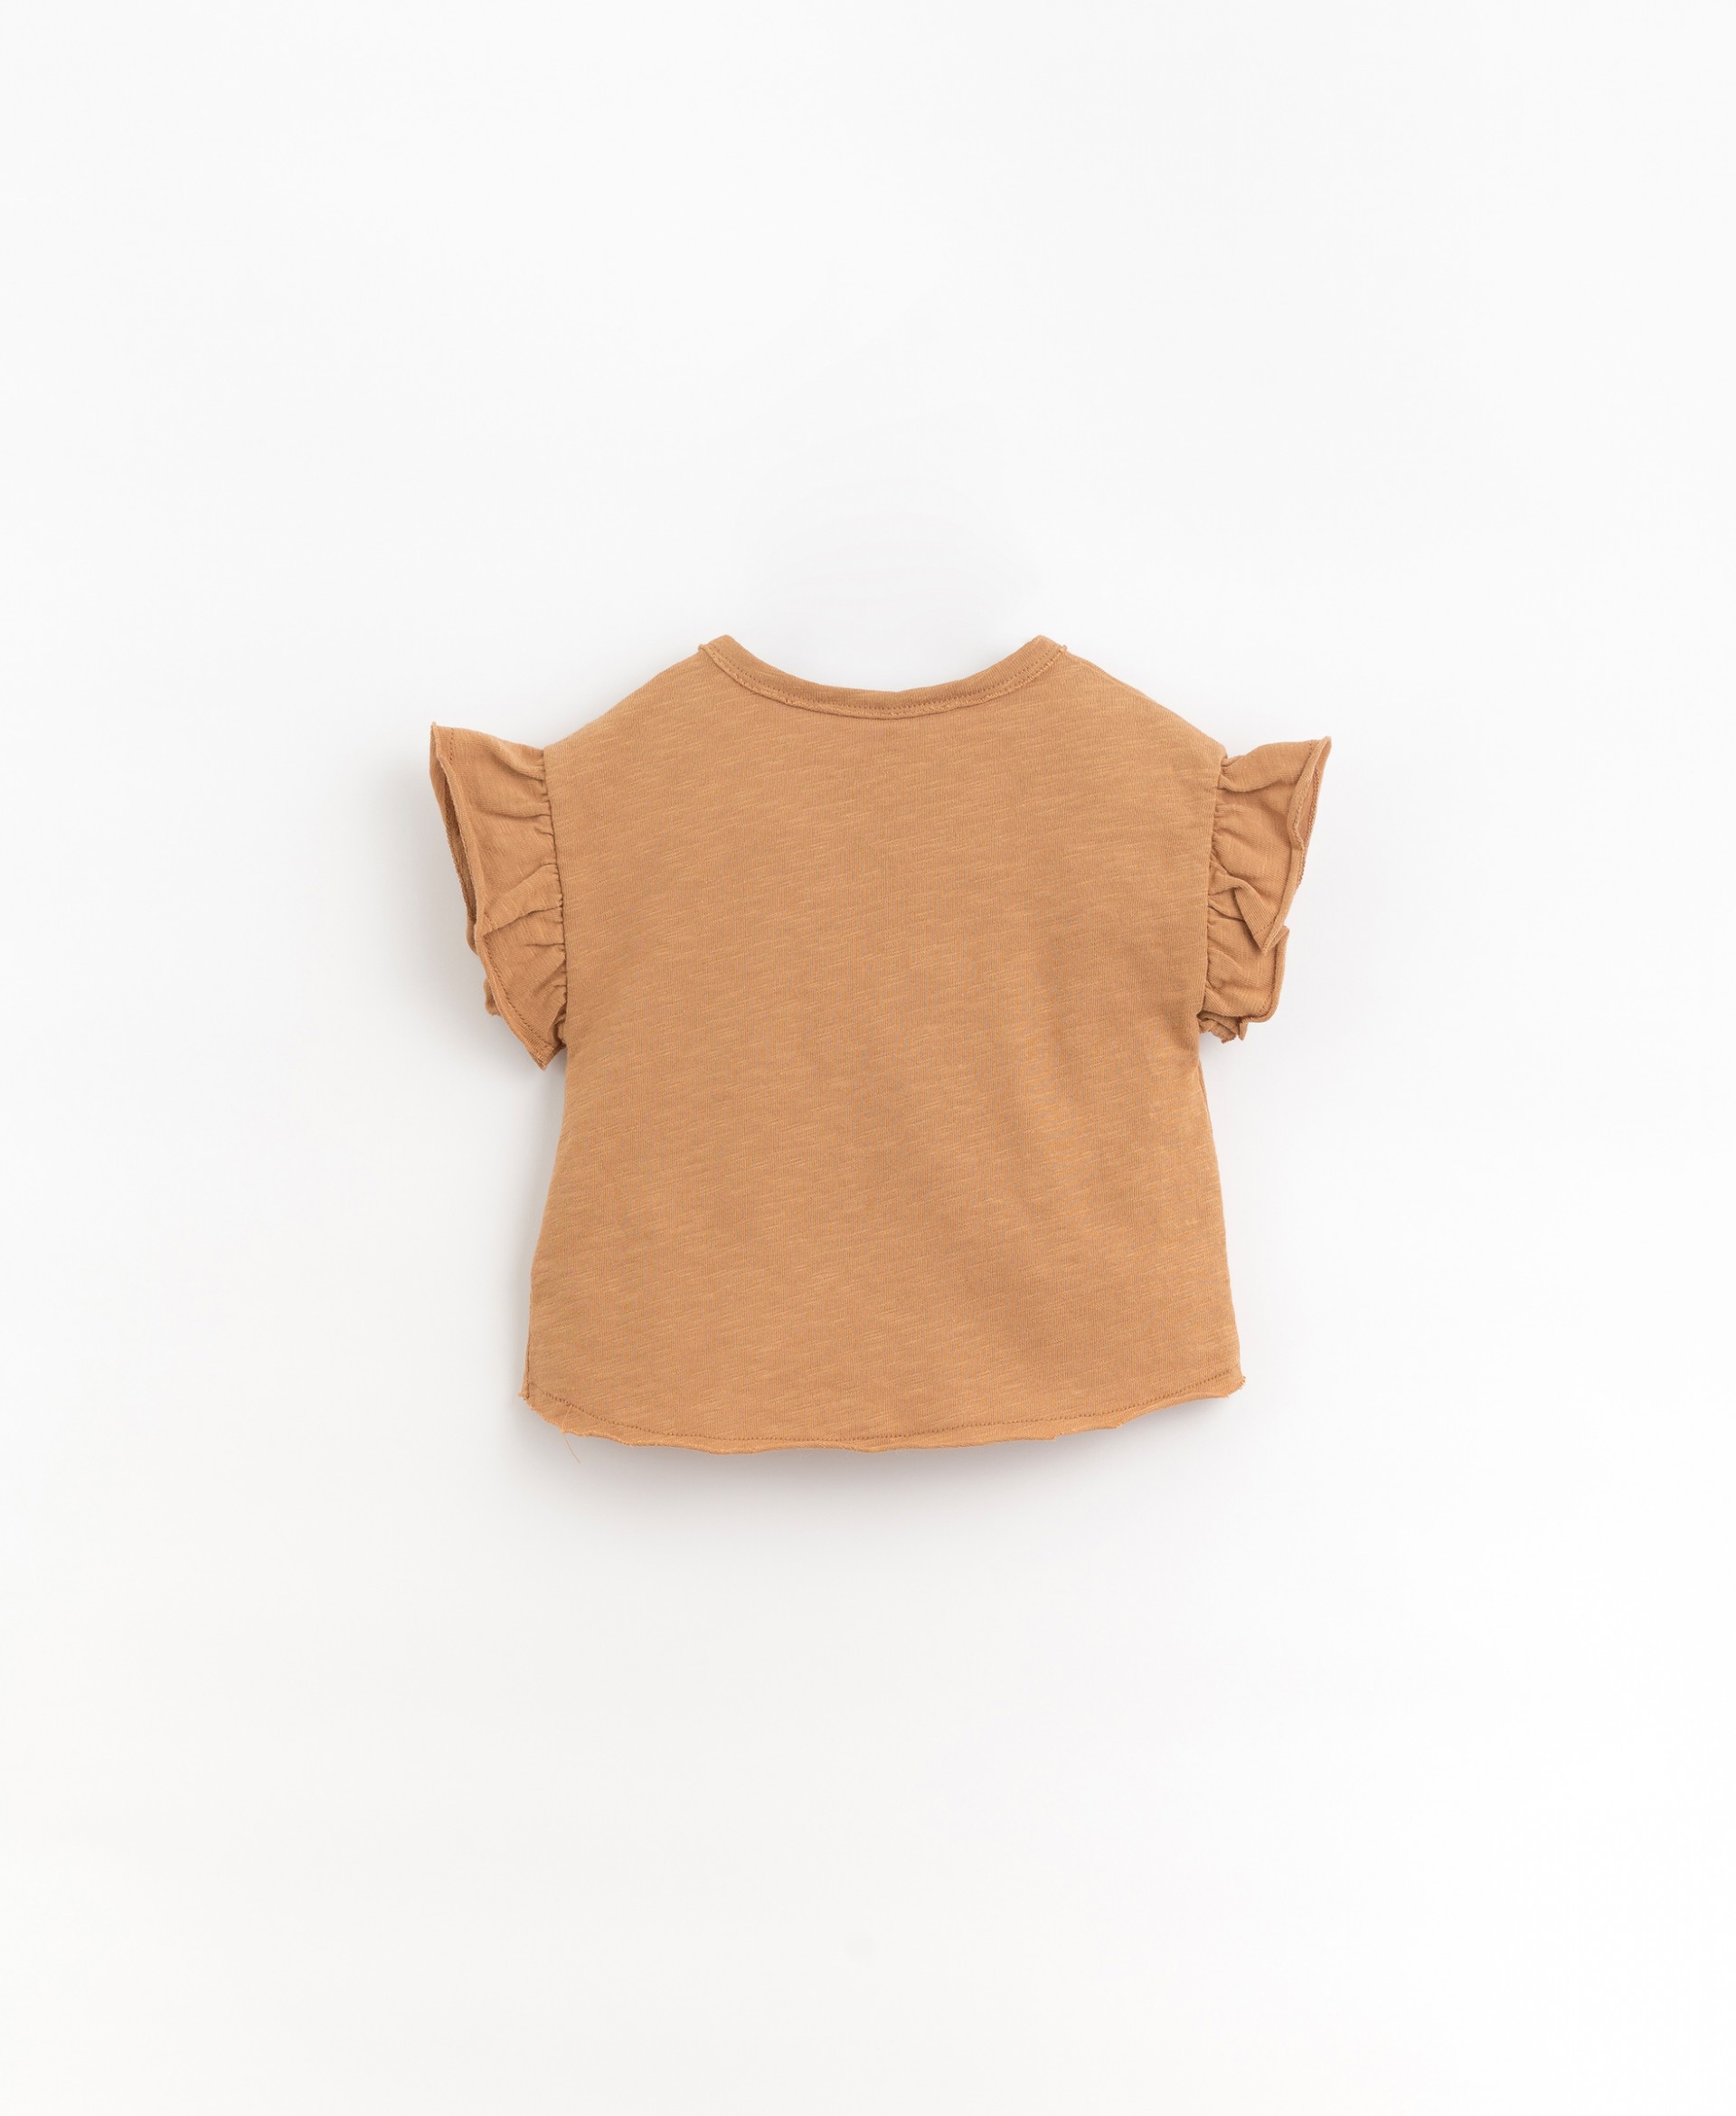 T-shirt in organic cotton with a front pocket | Organic Care